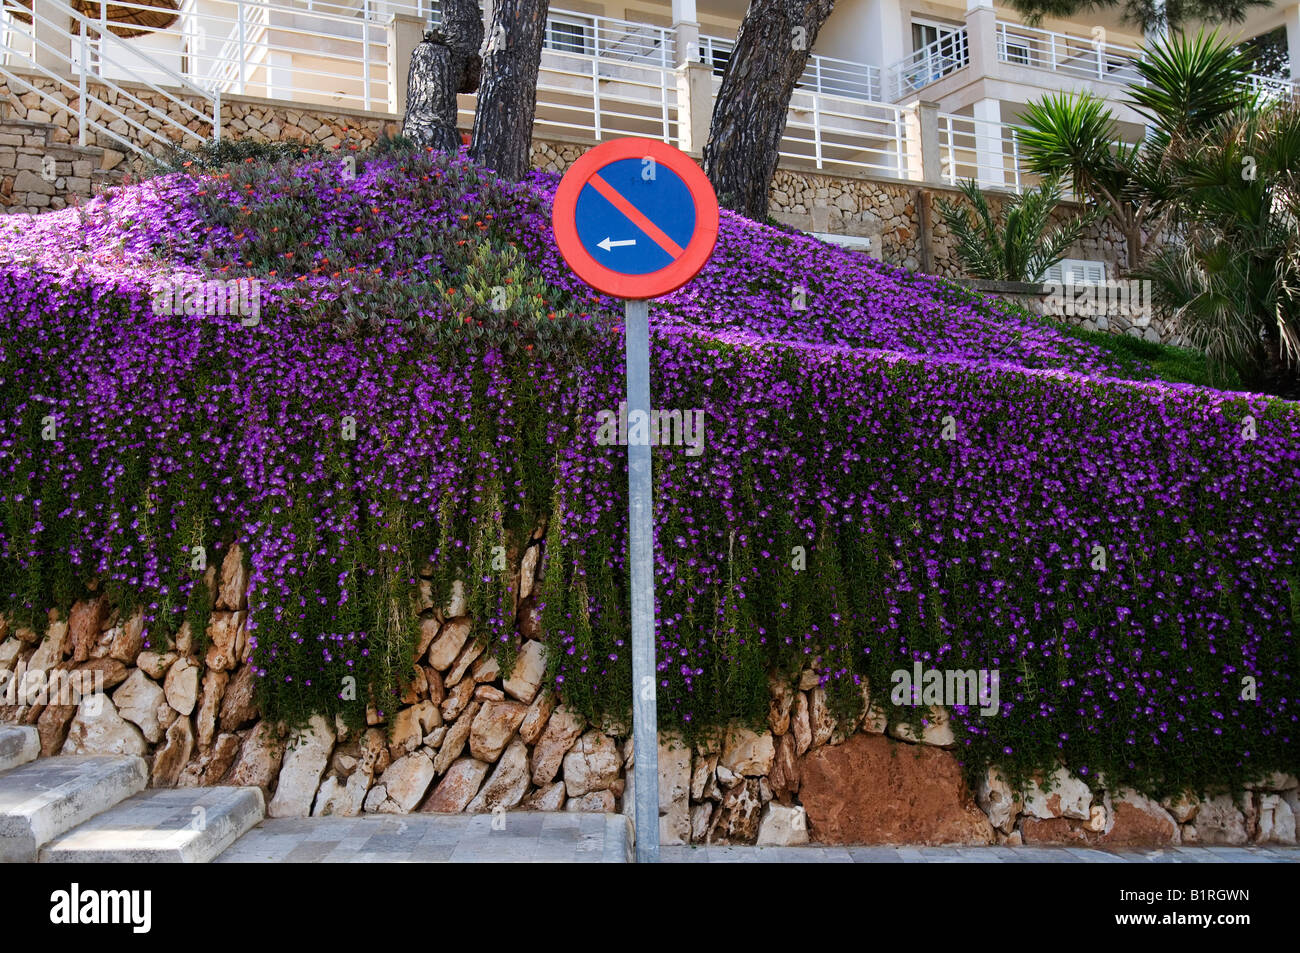 Stopping restriction sign in front of a blooming slope, Cala Figuera, Majorca, Balearic Islands, Spain, Europe Stock Photo